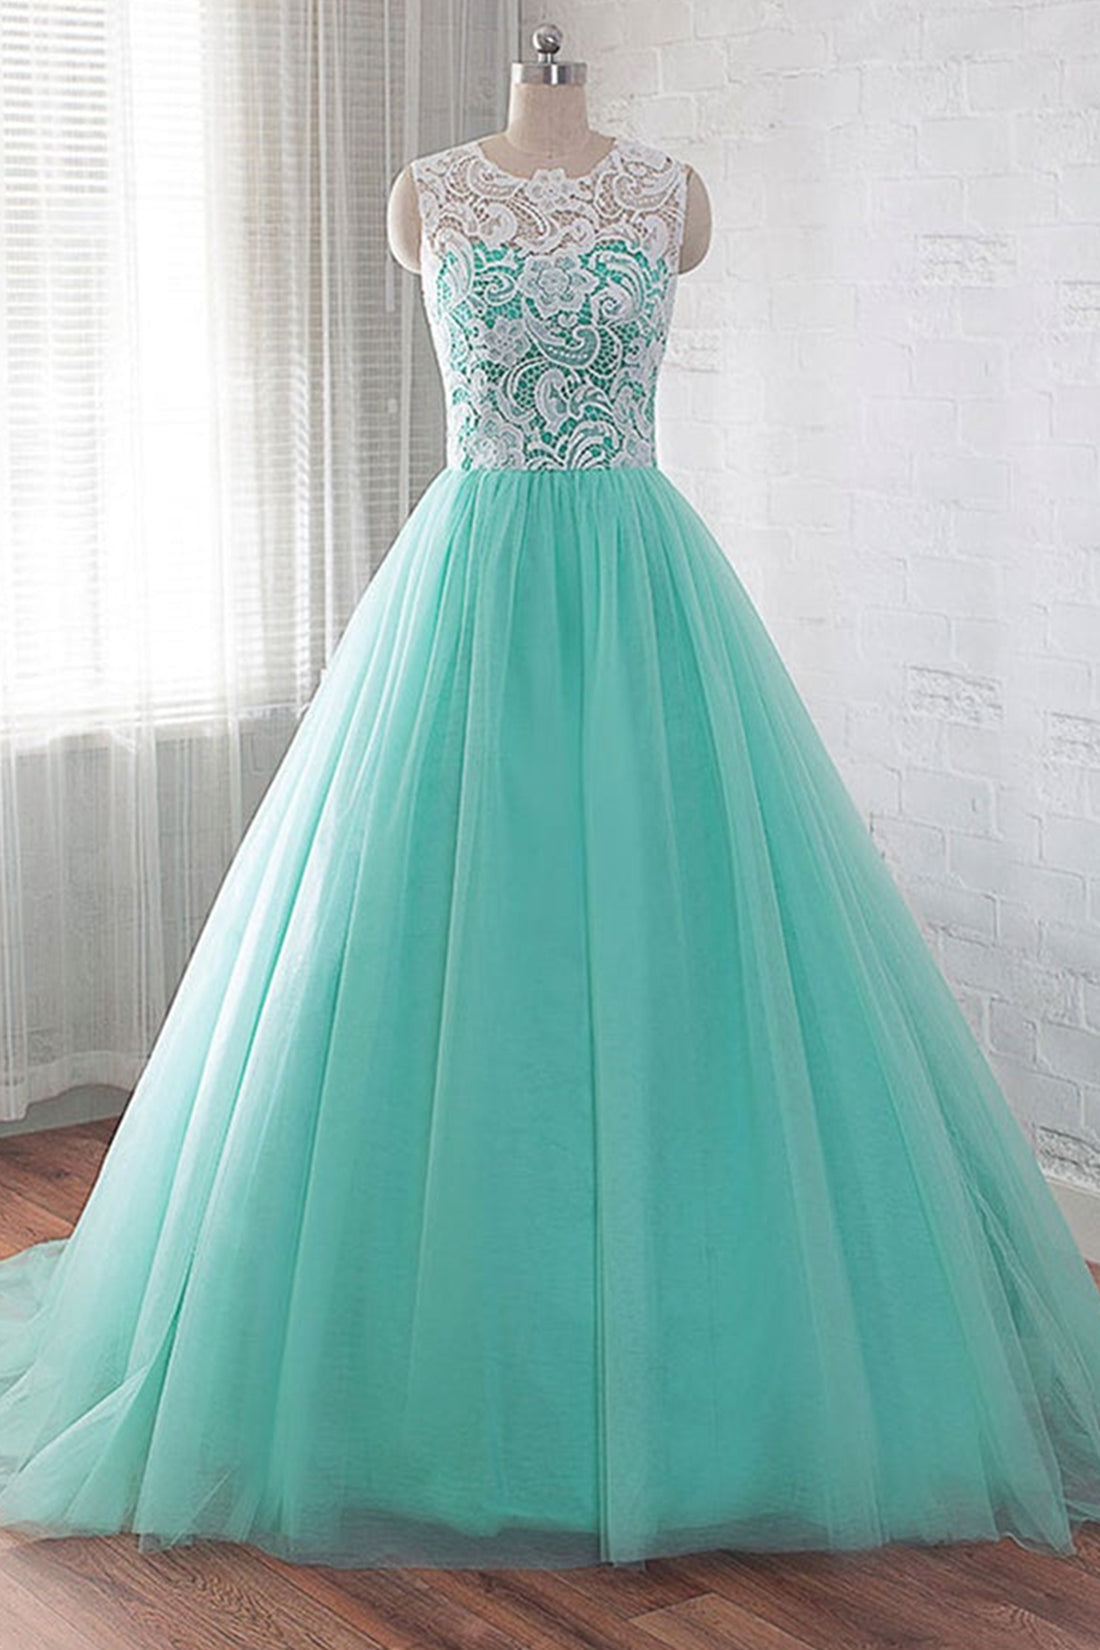 Round Neck Green Tulle Long Prom Dresses with White Lace, Green Lace Formal Dresses, Green Evening Dresses